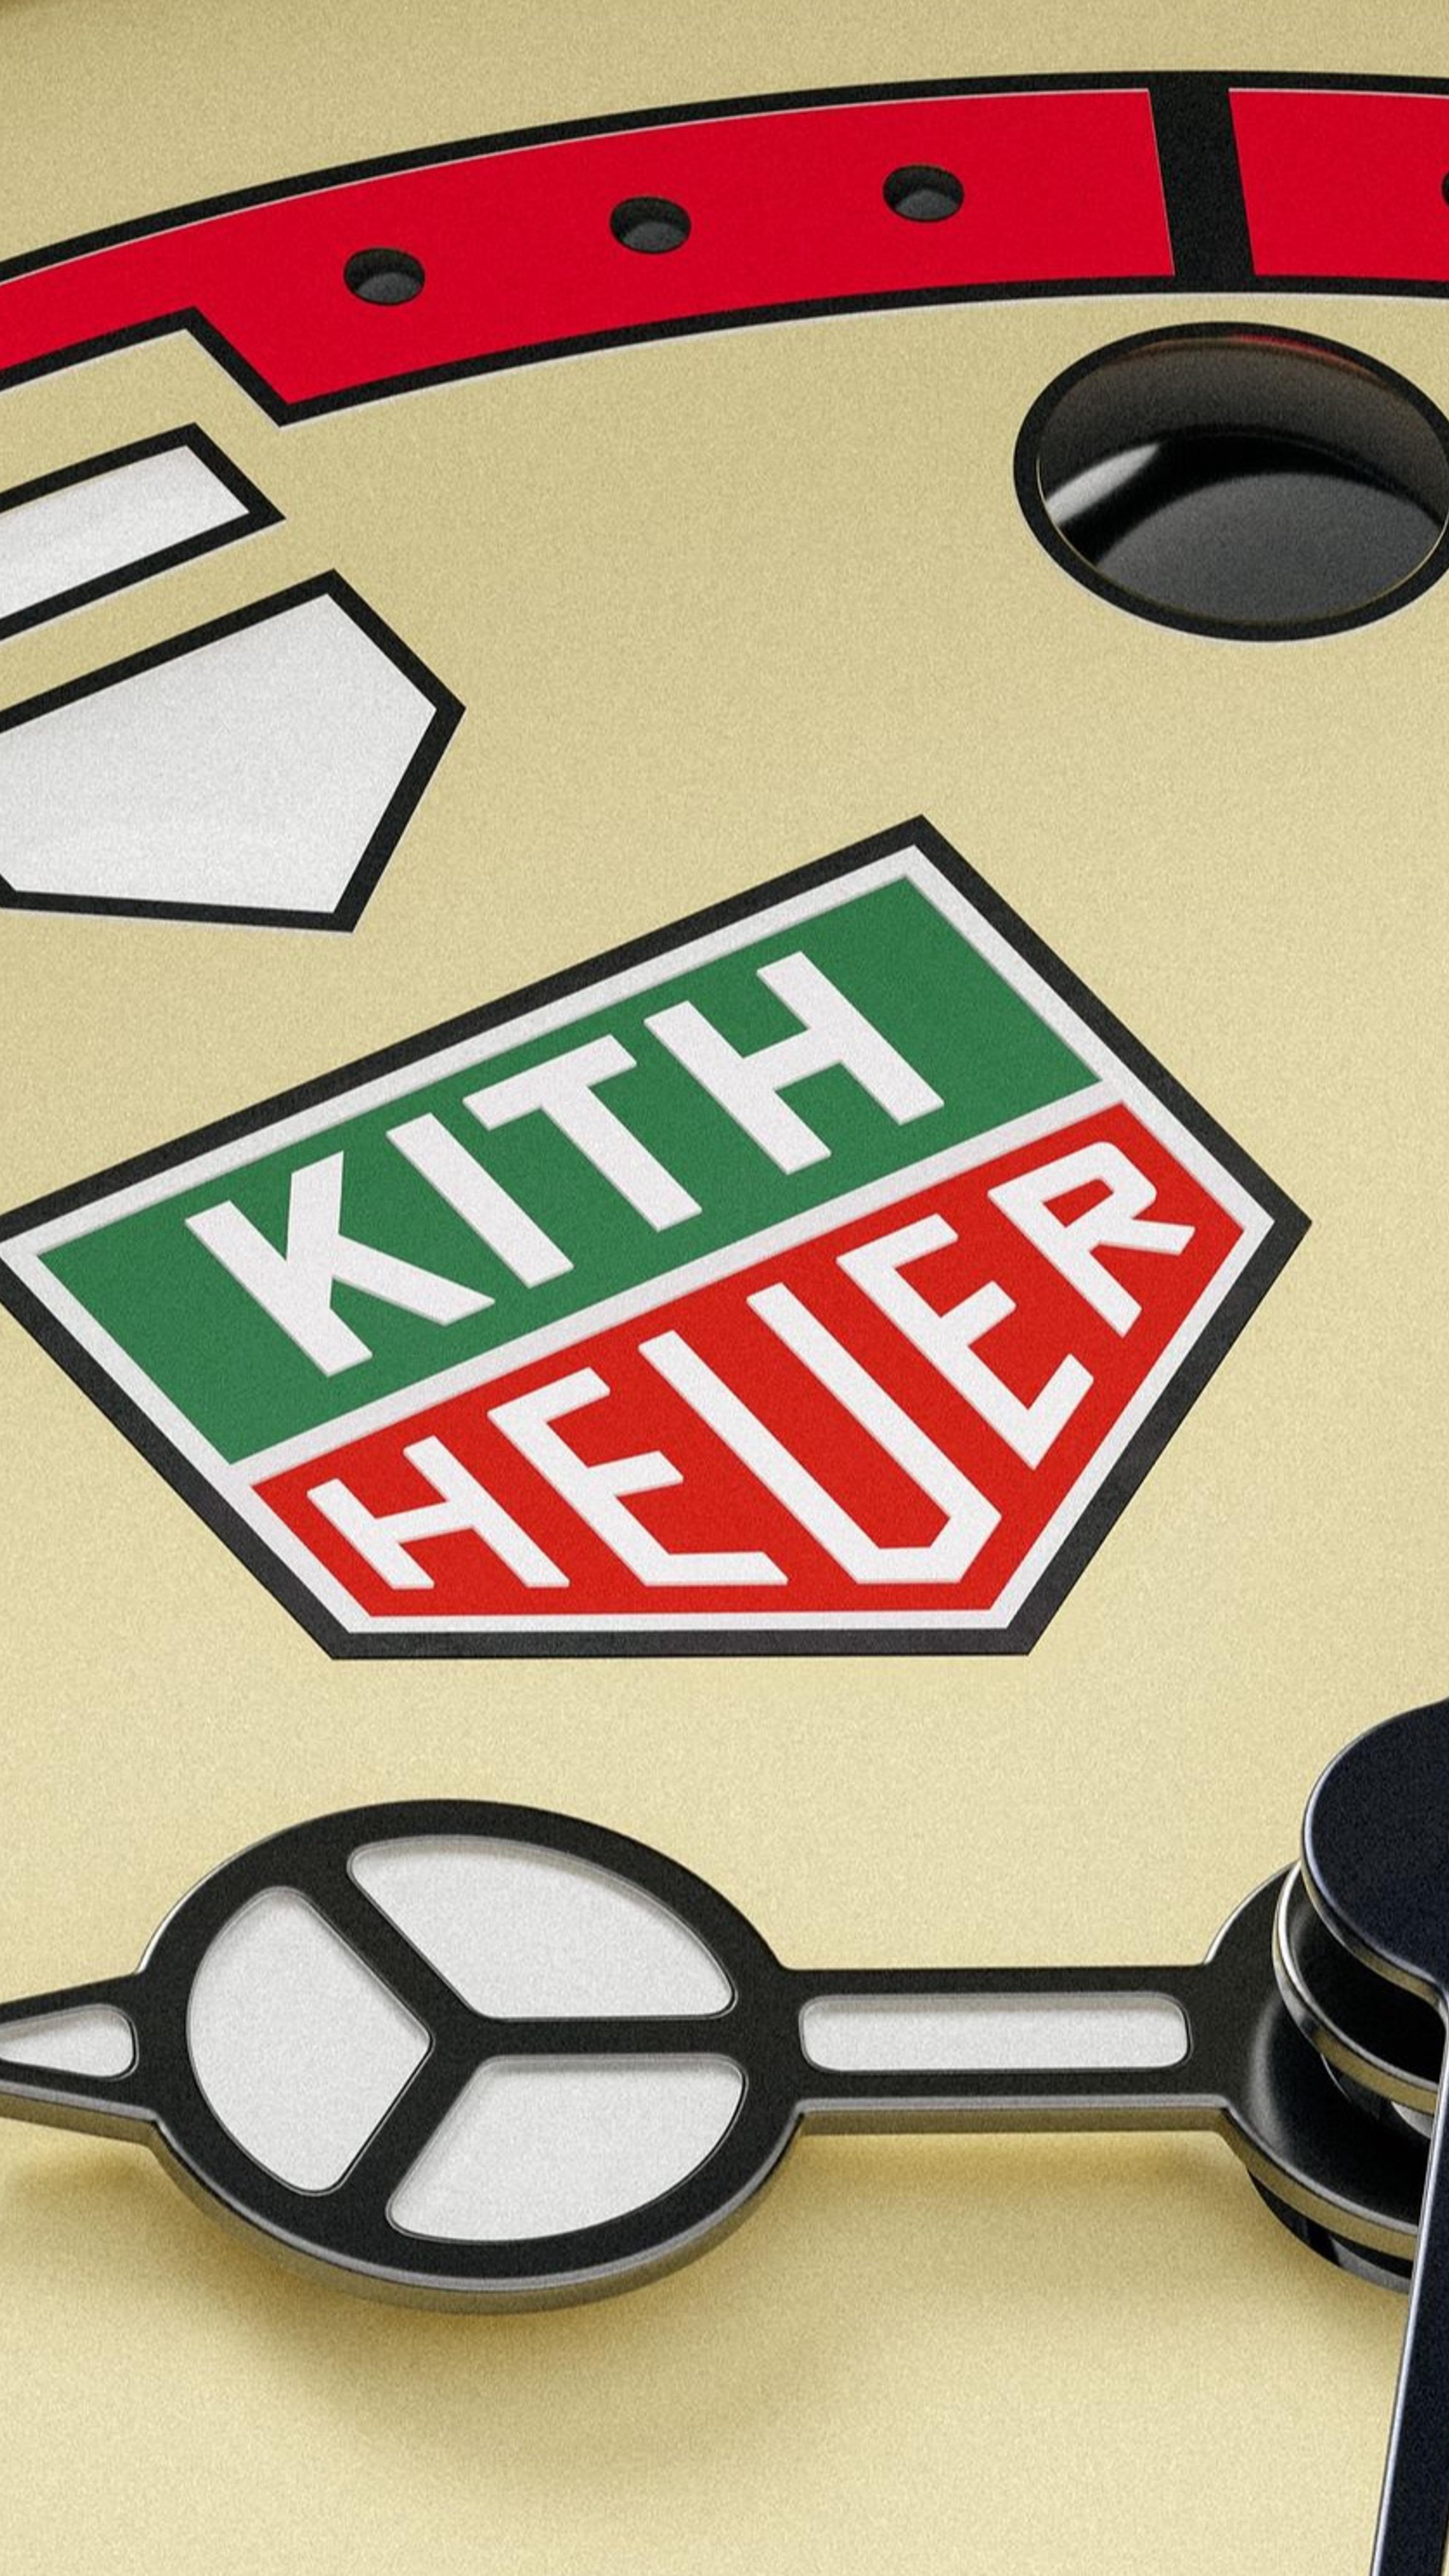 Preview image for the show titled "Tanner & Co: Presents Kith Tag Heuer" at Today @ 11:00 PM